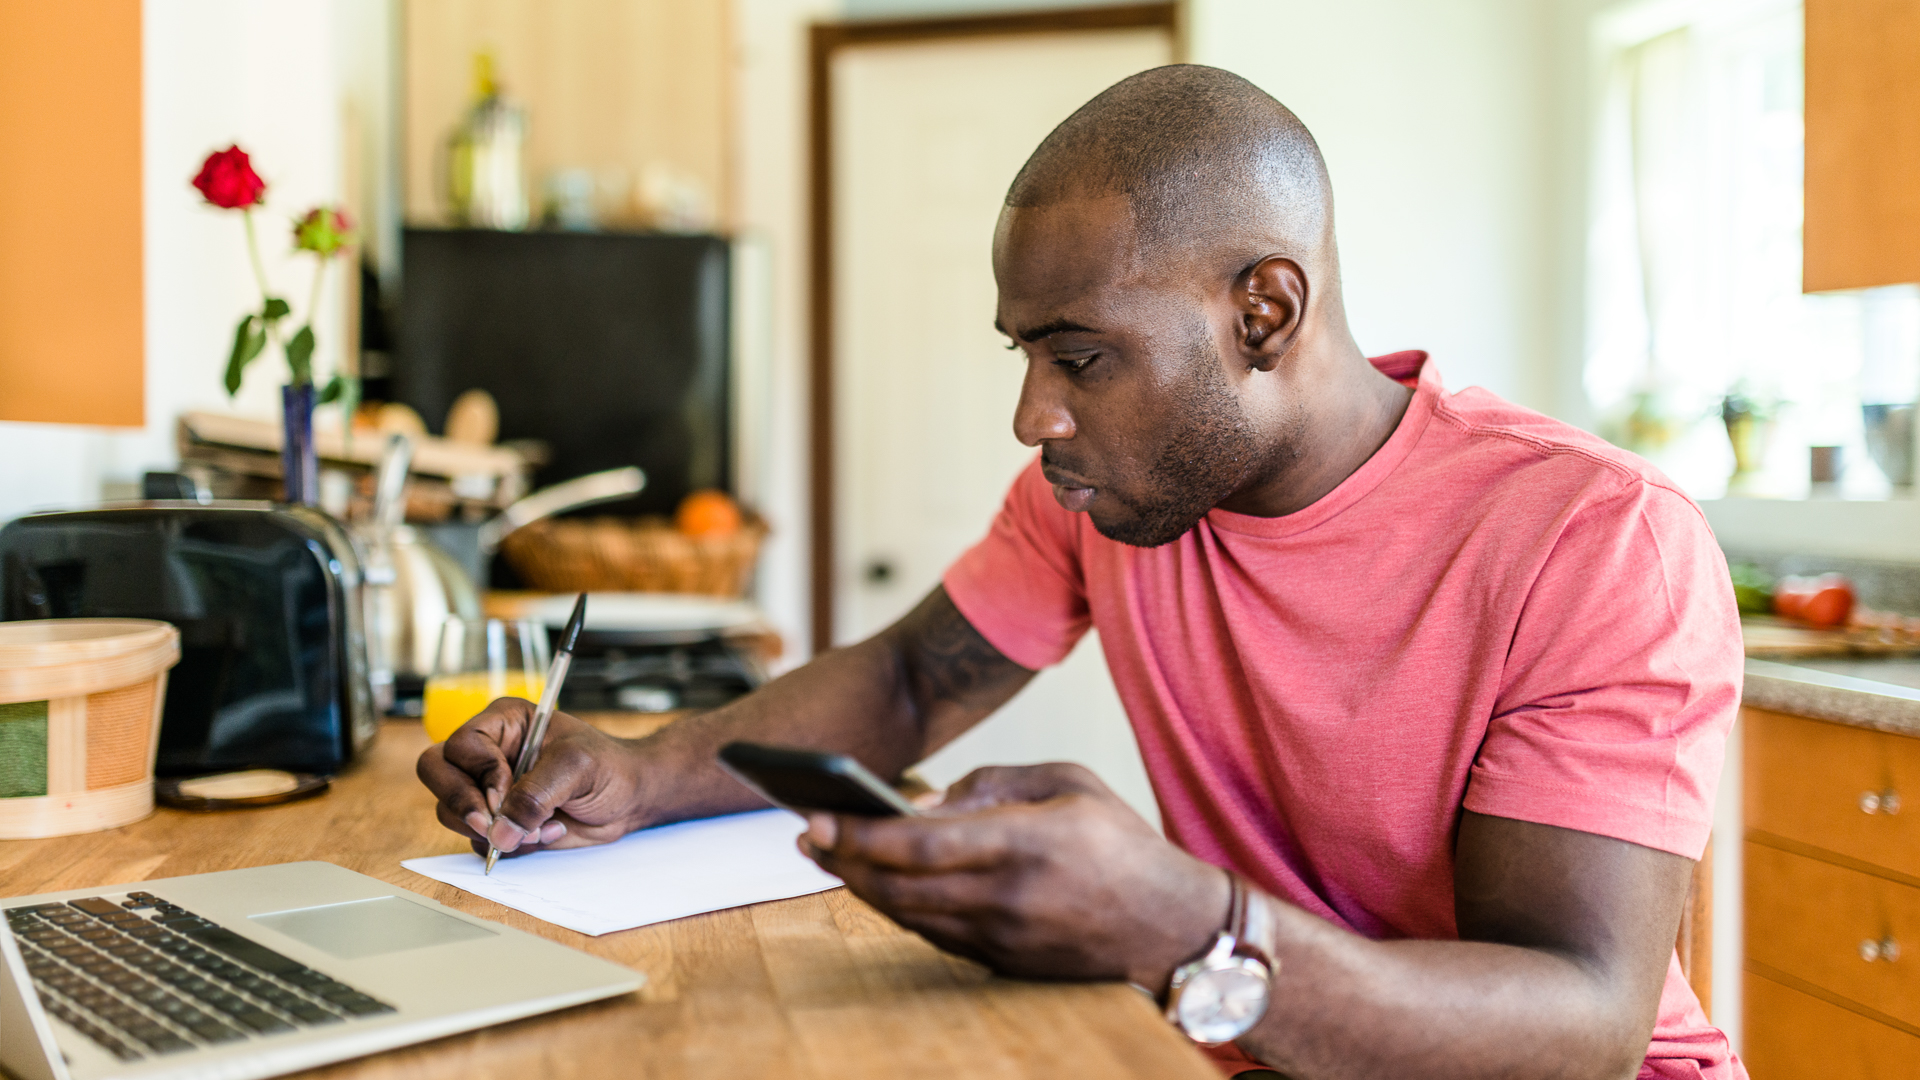 <p>To take control of your finances, you need to tell your money what to do and when to do it, explained Eric Bowie, owner and founder of <a href="http://www.smartmoneybro.com/" rel="noreferrer noopener">Smart Money Bro</a>. And that requires having a budget. "I recommend a zero-based budget," he said. </p> <p>This means setting up your budget so that your income minus expenses equals zero. In other words, every dollar you earn has a job to do, whether that's paying a bill, paying down debt or going toward savings and investments. "A monthly budget where all of your money is spent on paper, is the ultimate top-down management of your finances," Bowie added.</p> <p><strong><em>POLL:<a href="https://www.gobankingrates.com/taxes/refunds/poll-how-much-do-you-expect-your-tax-refund-to-be-this-year/?utm_campaign=1162078&utm_source=msn.com&utm_content=5&utm_medium=rss"> How Much Do You Expect Your Tax Refund To Be This Year?</a></em></strong></p>